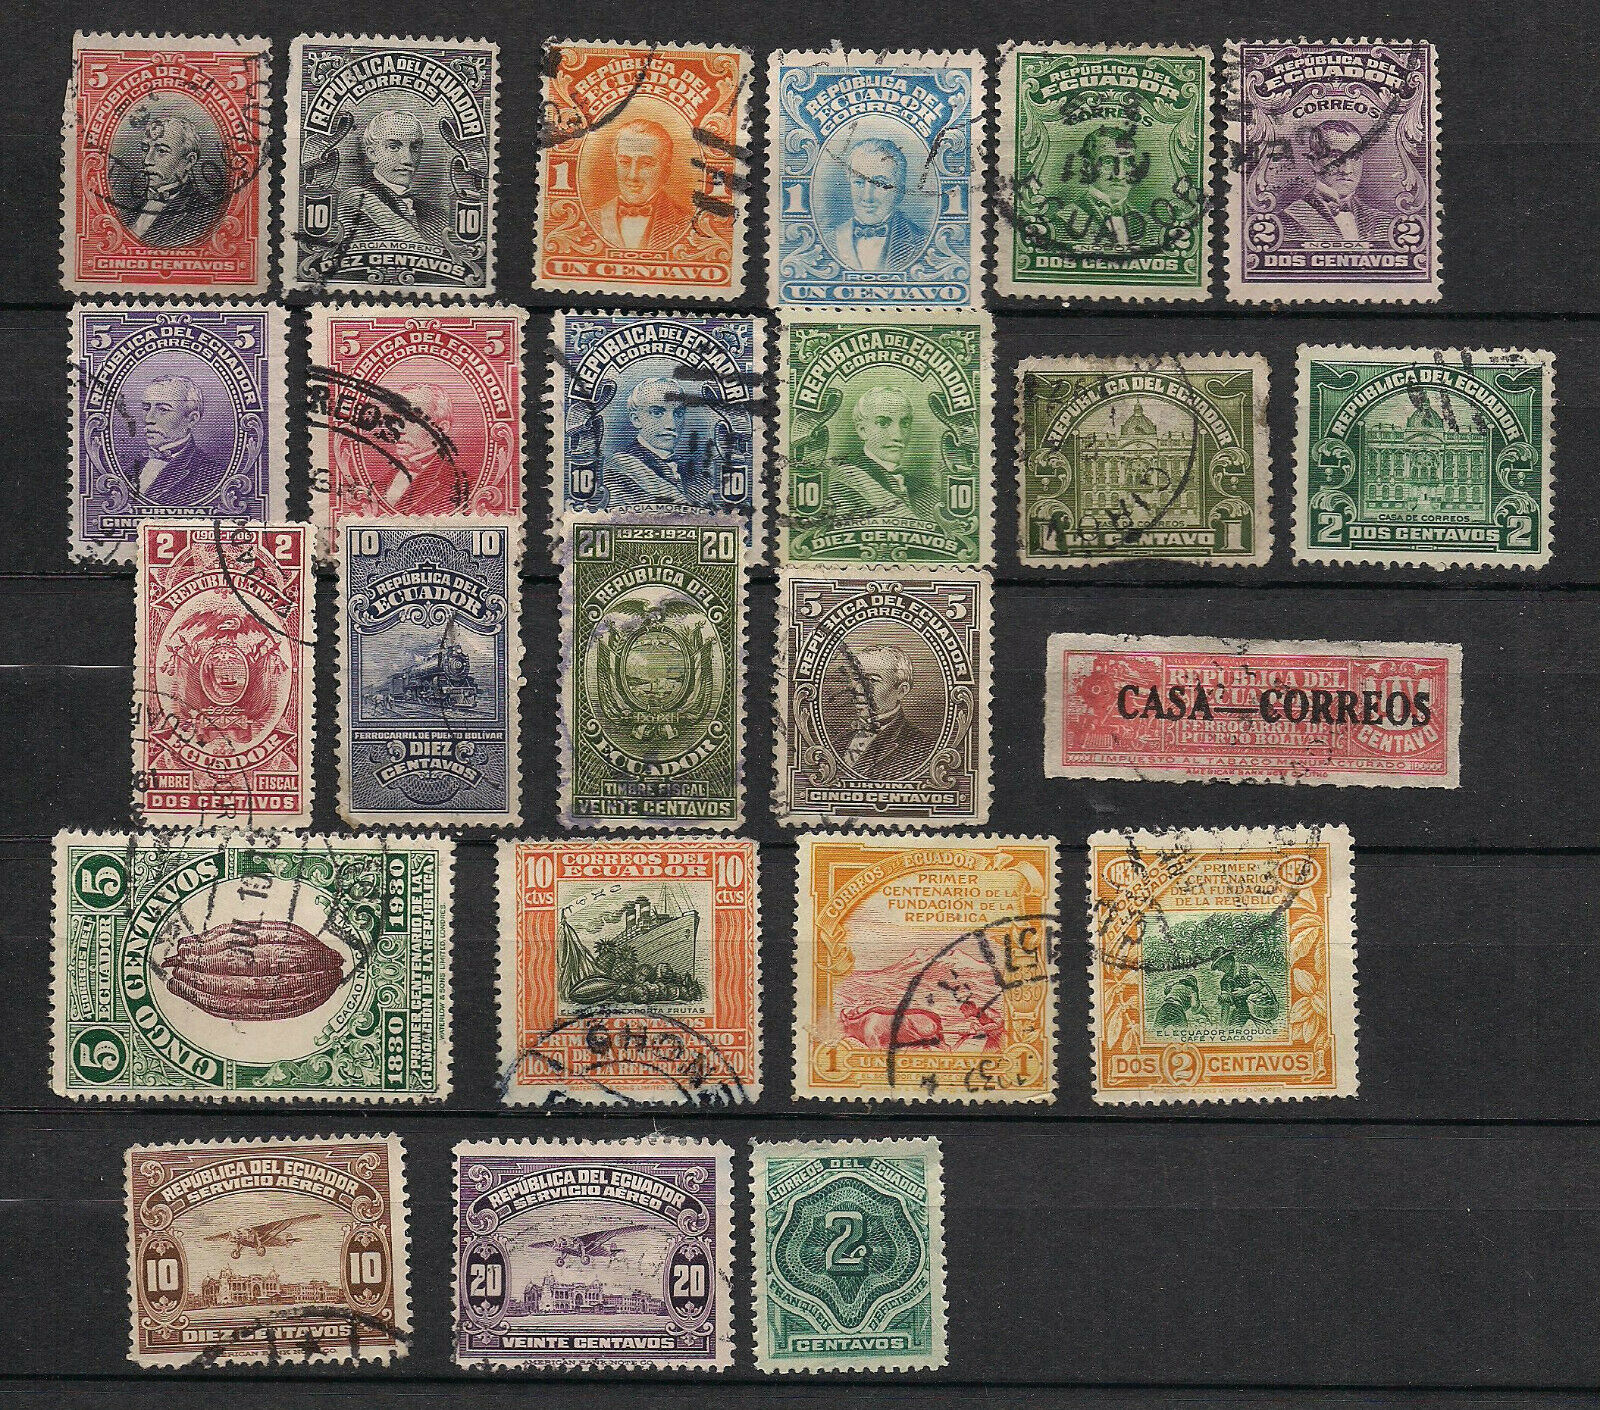 Ecuador - Lot #2. Mh And Used. 19th And 20th Century. Some Faults.